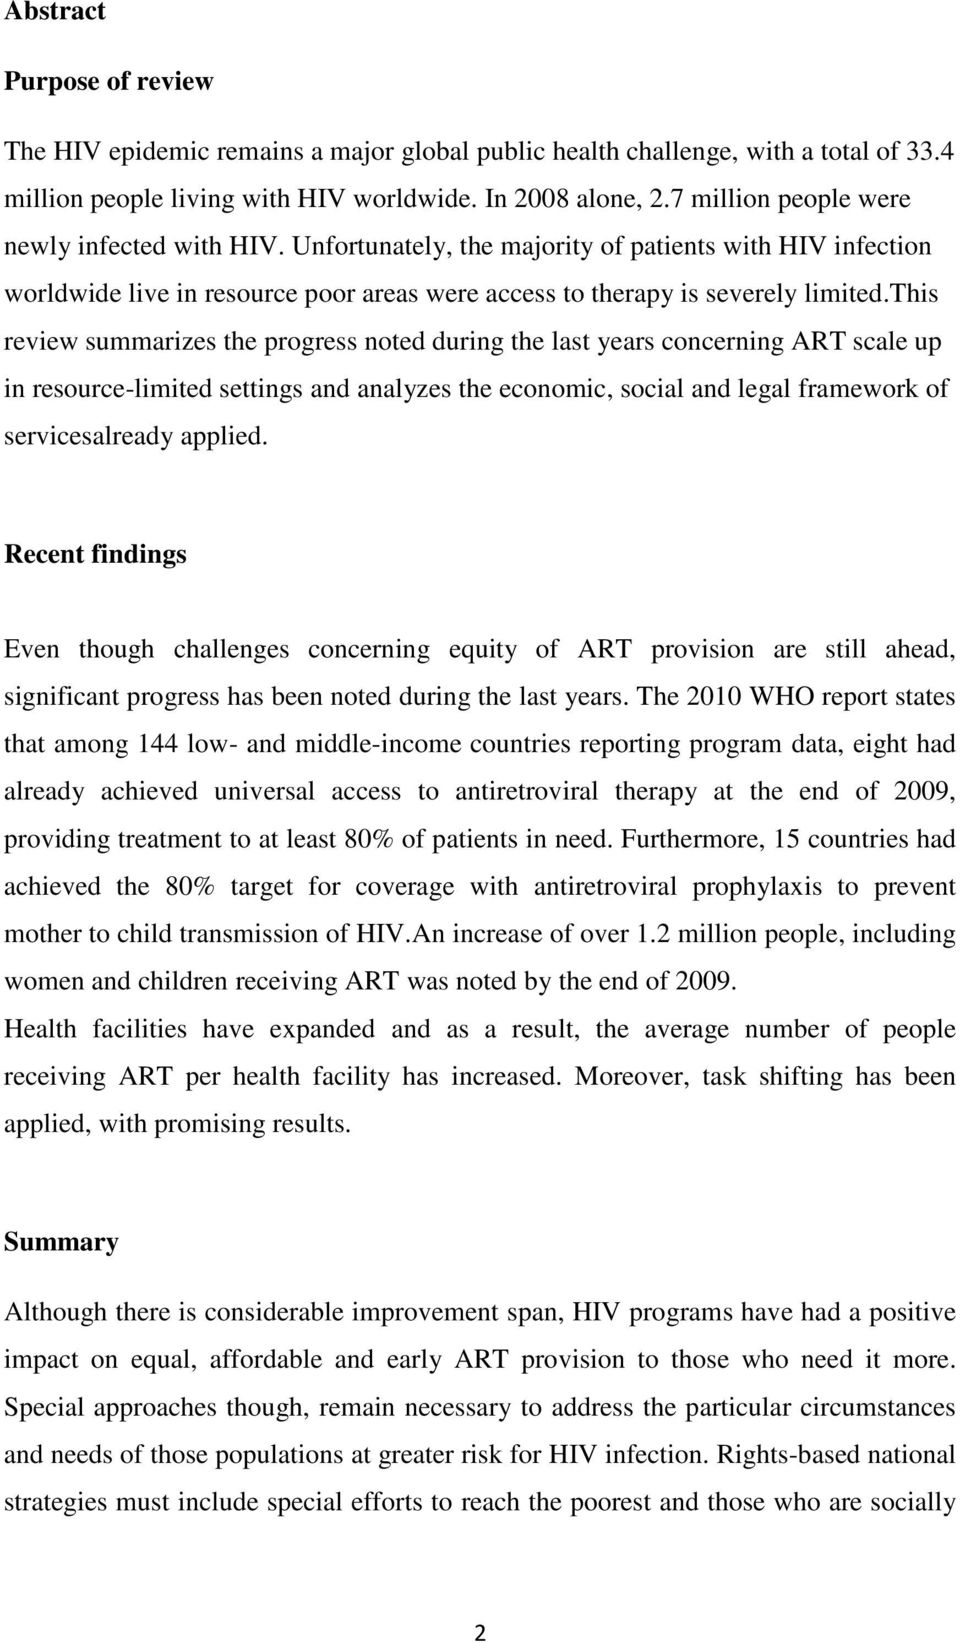 this review summarizes the progress noted during the last years concerning ART scale up in resource-limited settings and analyzes the economic, social and legal framework of servicesalready applied.